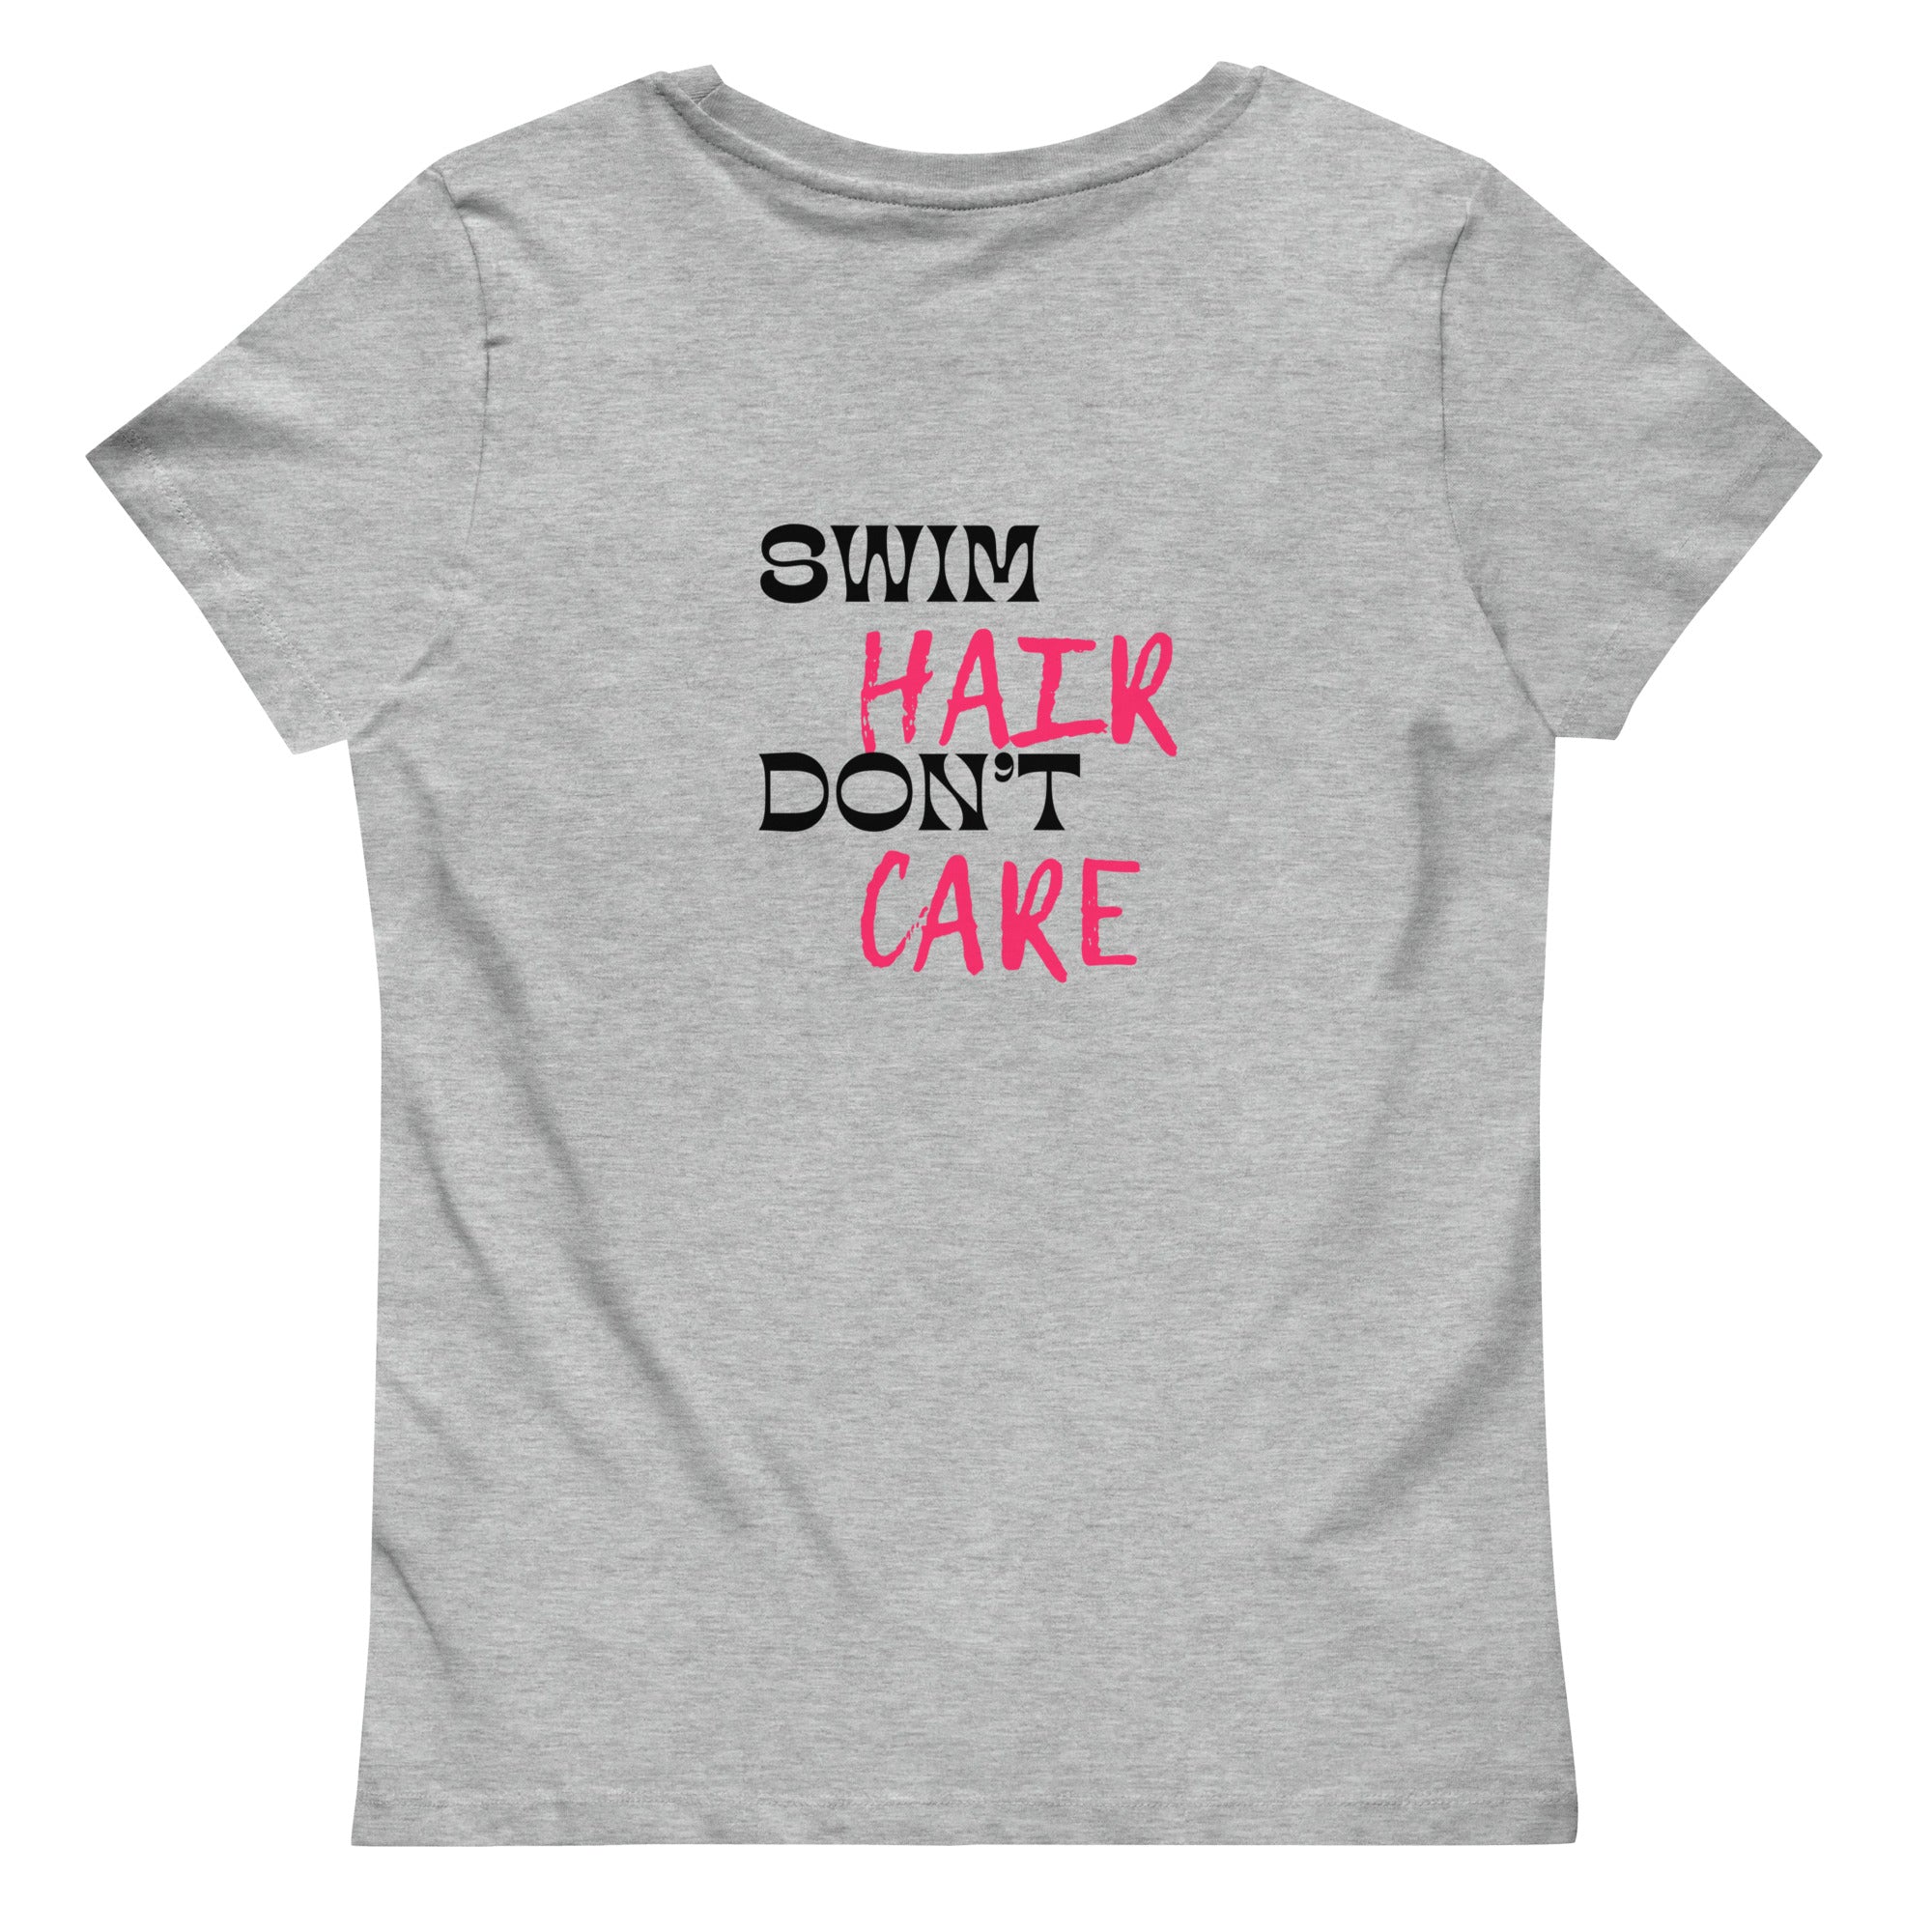 Show Your Love for Swimming with the Swim Hair Don't Care Women's Fitted Eco Tee